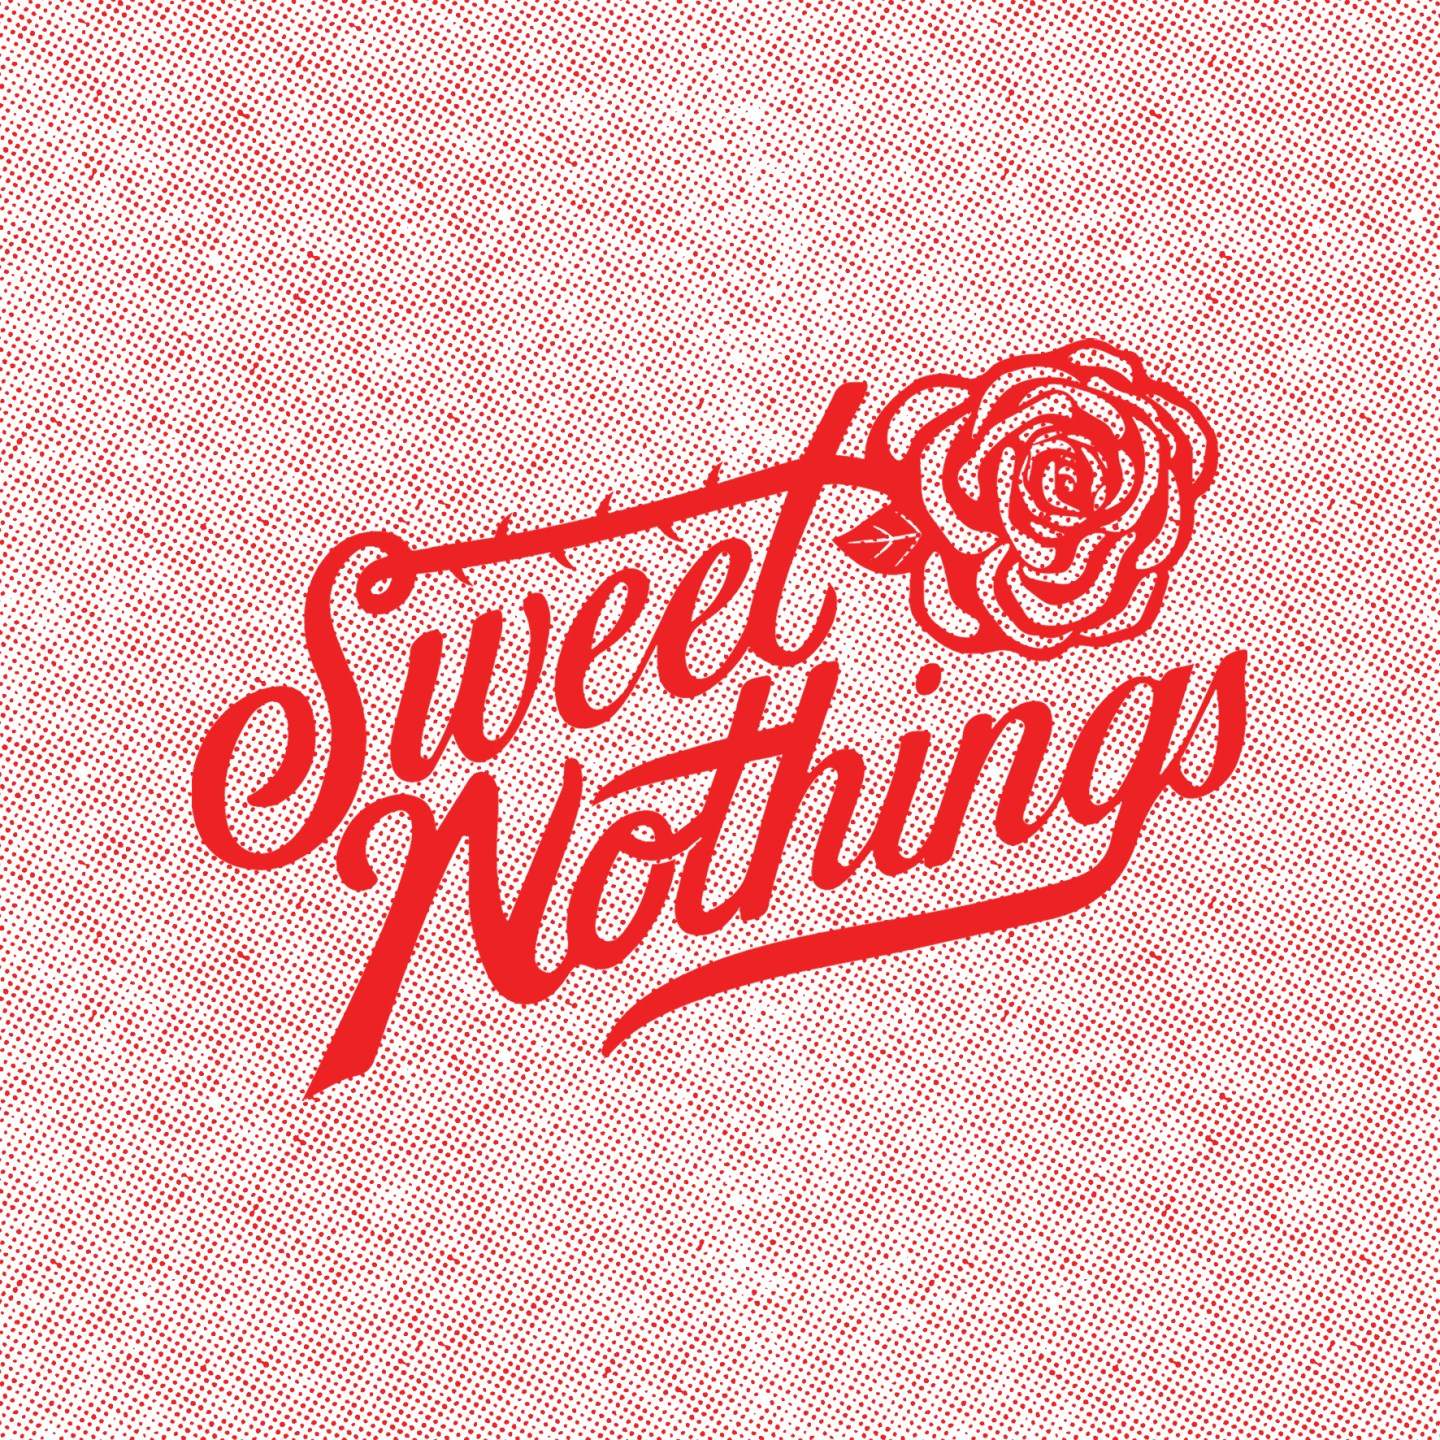 Sweet Nothings rebrands, expands lineup